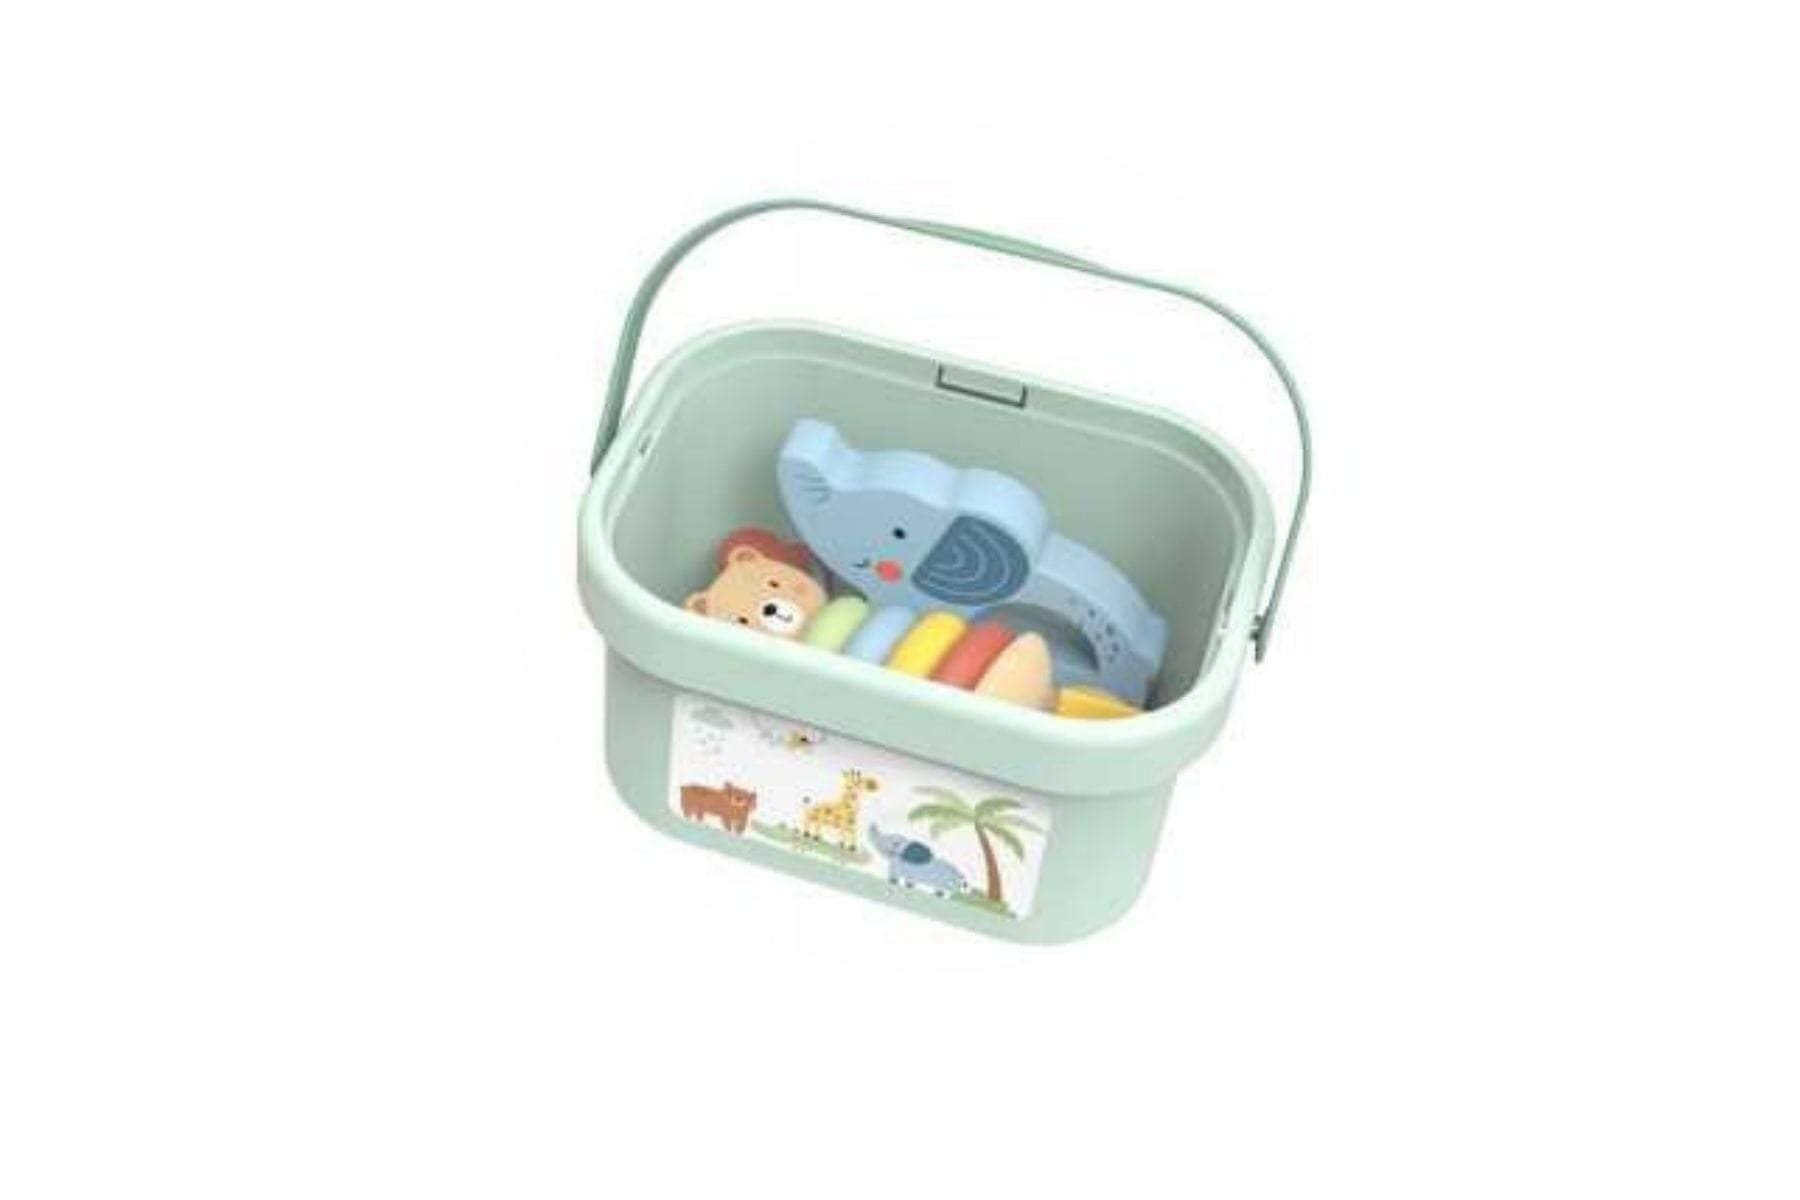 My Forest Friends 3 In 1 Toy Box